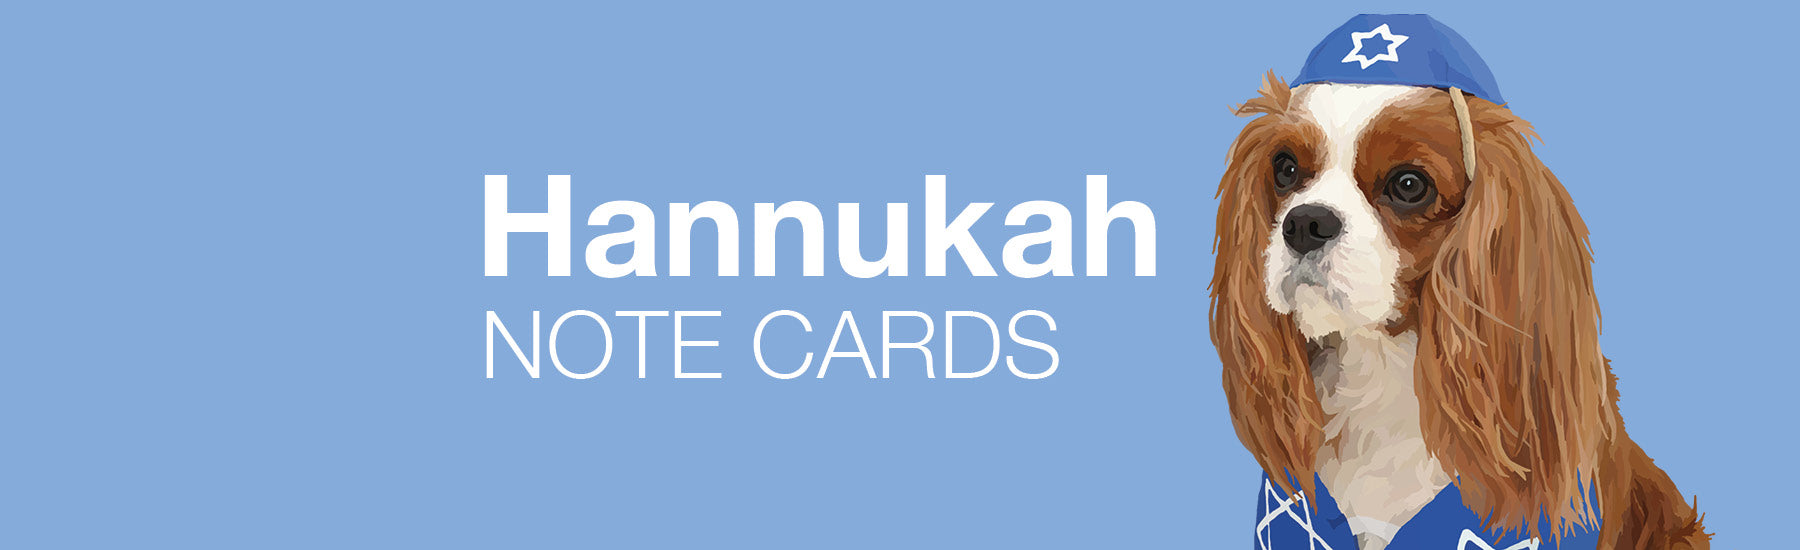 HANNUKAH NOTE CARDS